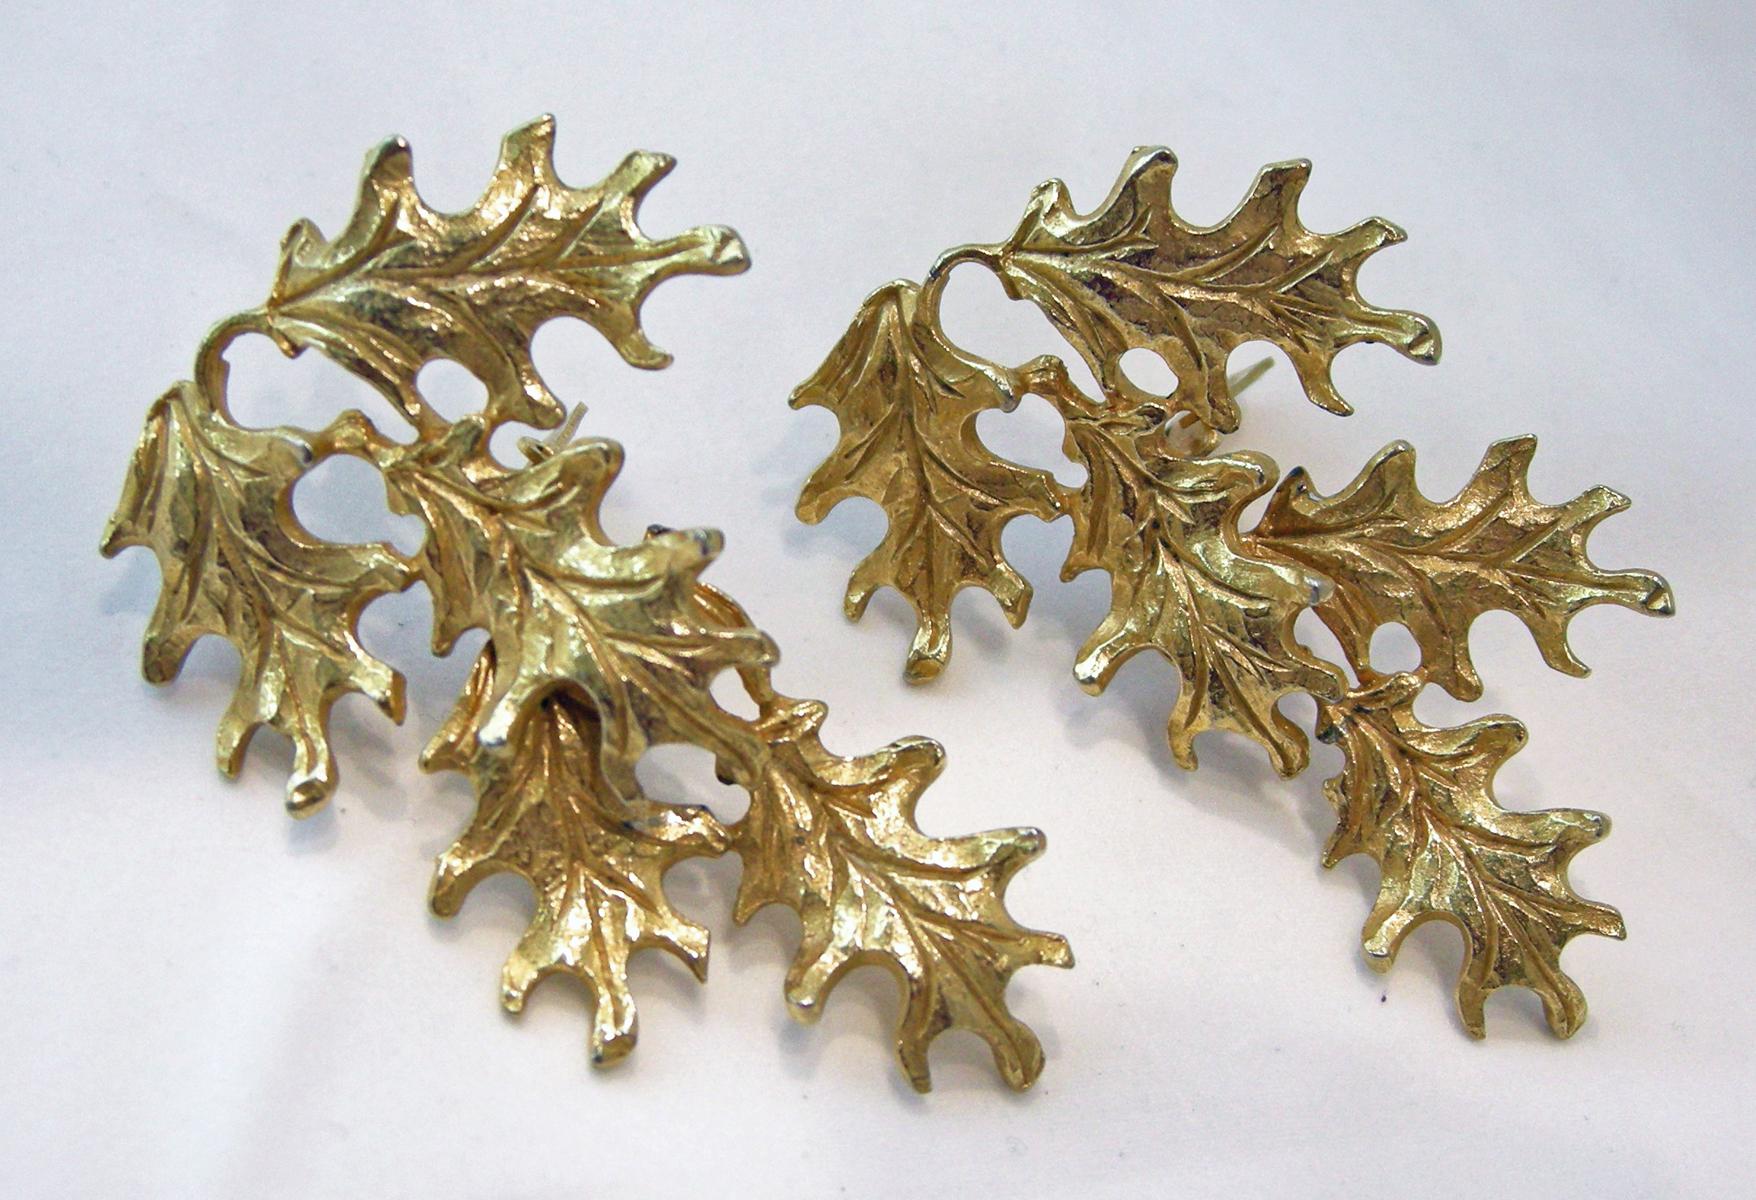 These vintage signed Mosell earrings actually dangle with decorative leaf design in a gold tone setting. The earrings measures 2-1/2” x 1-1/2” and is signed “Mosell”.  They are in excellent condition.